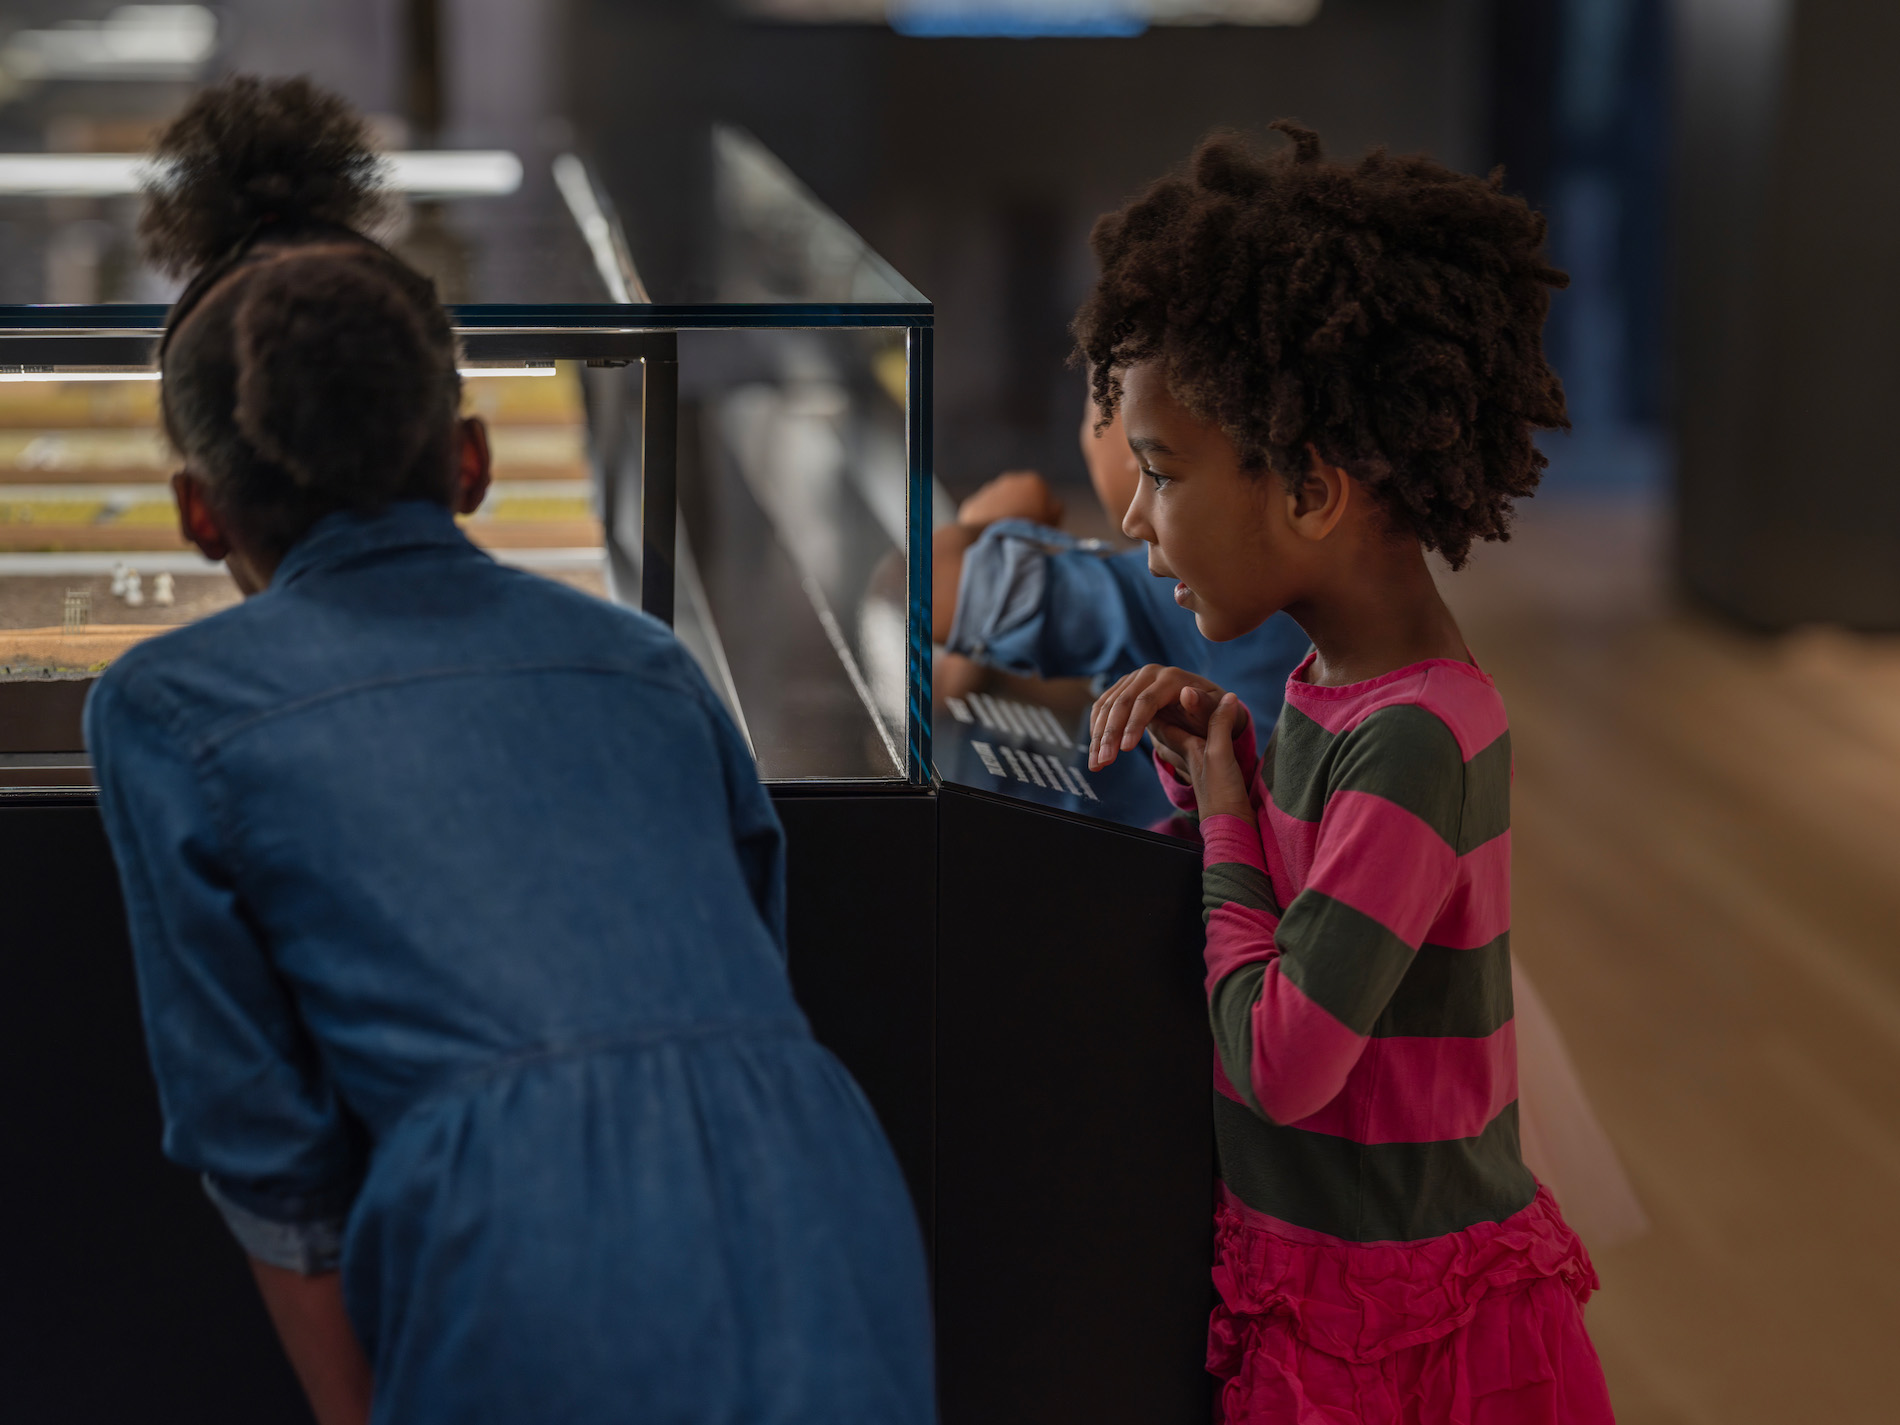 Two children looking at a museum exhibit